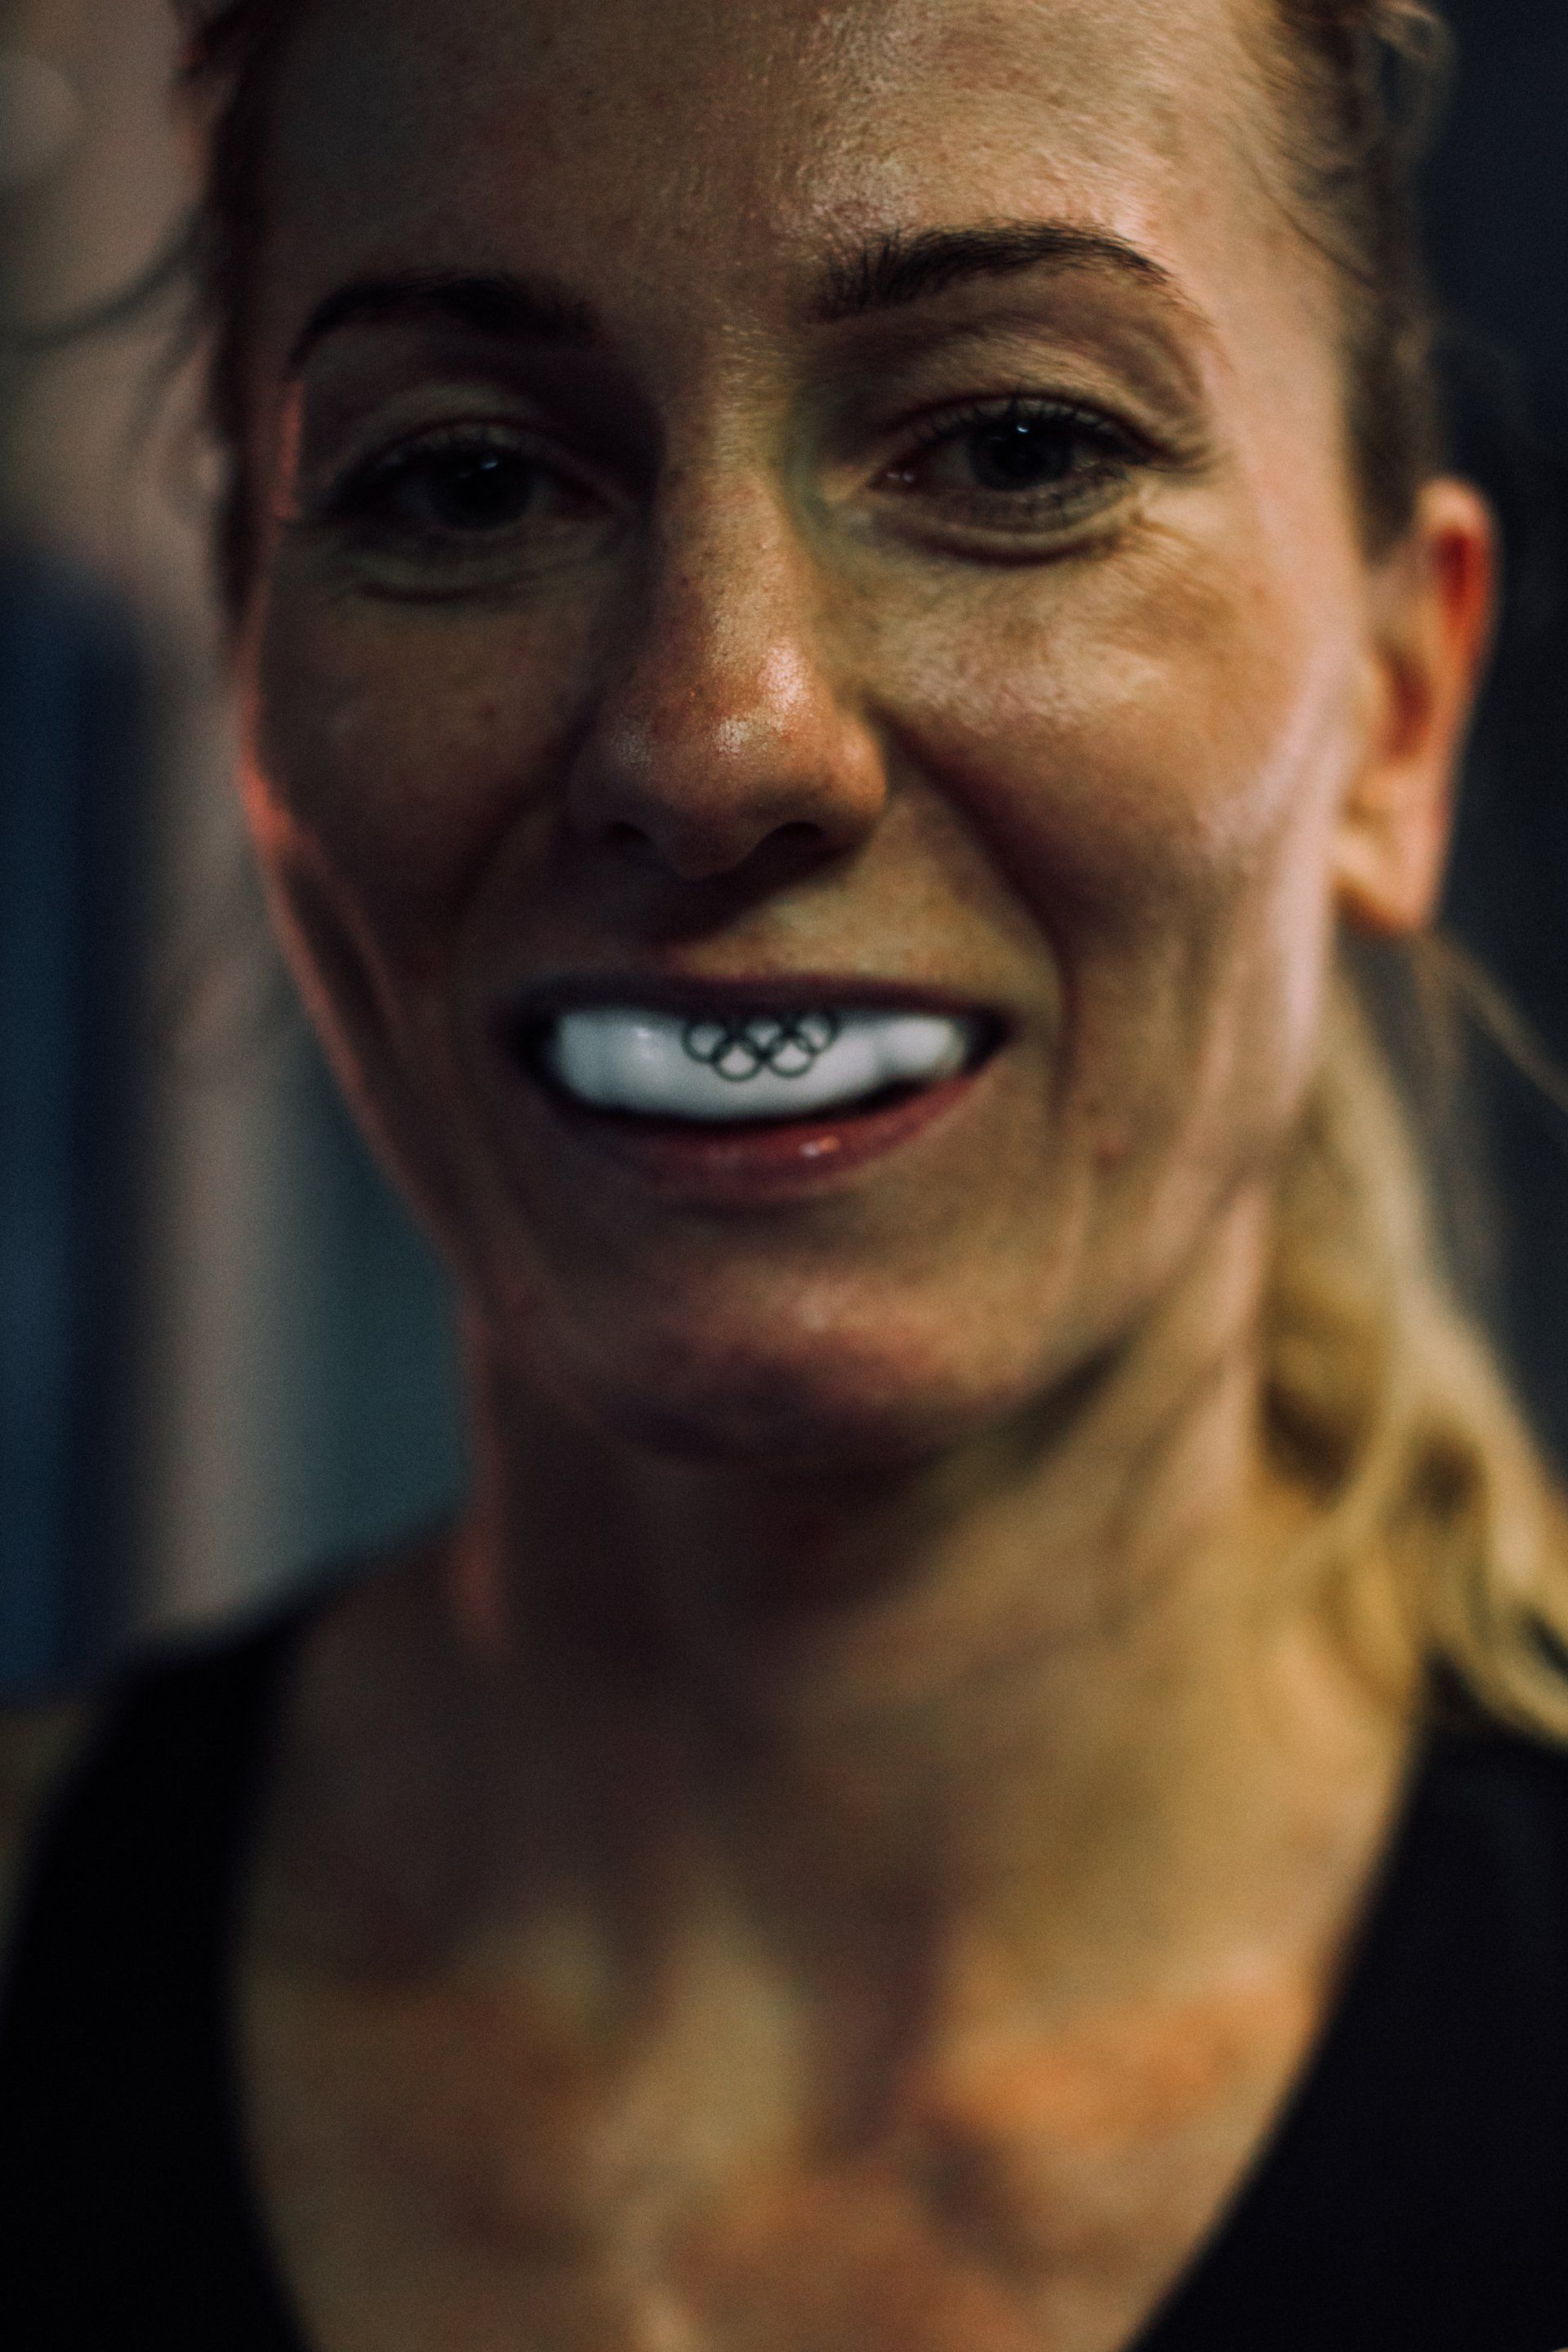 Mouth Guards: When and Why You Need One